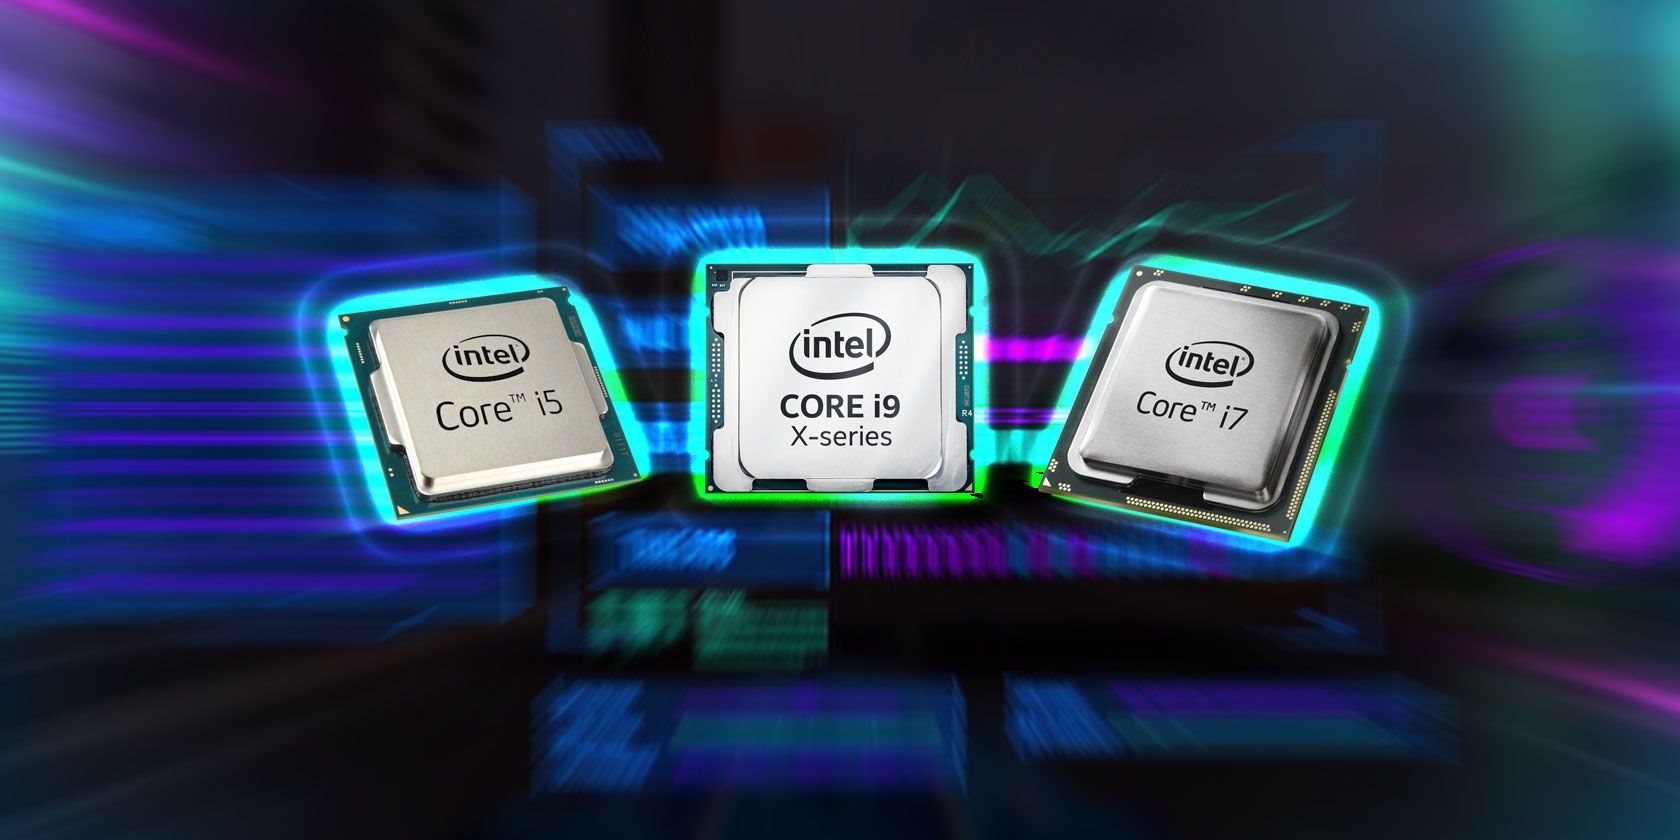 Core i7 vs. Core i9: Which high-end laptop CPU should you buy